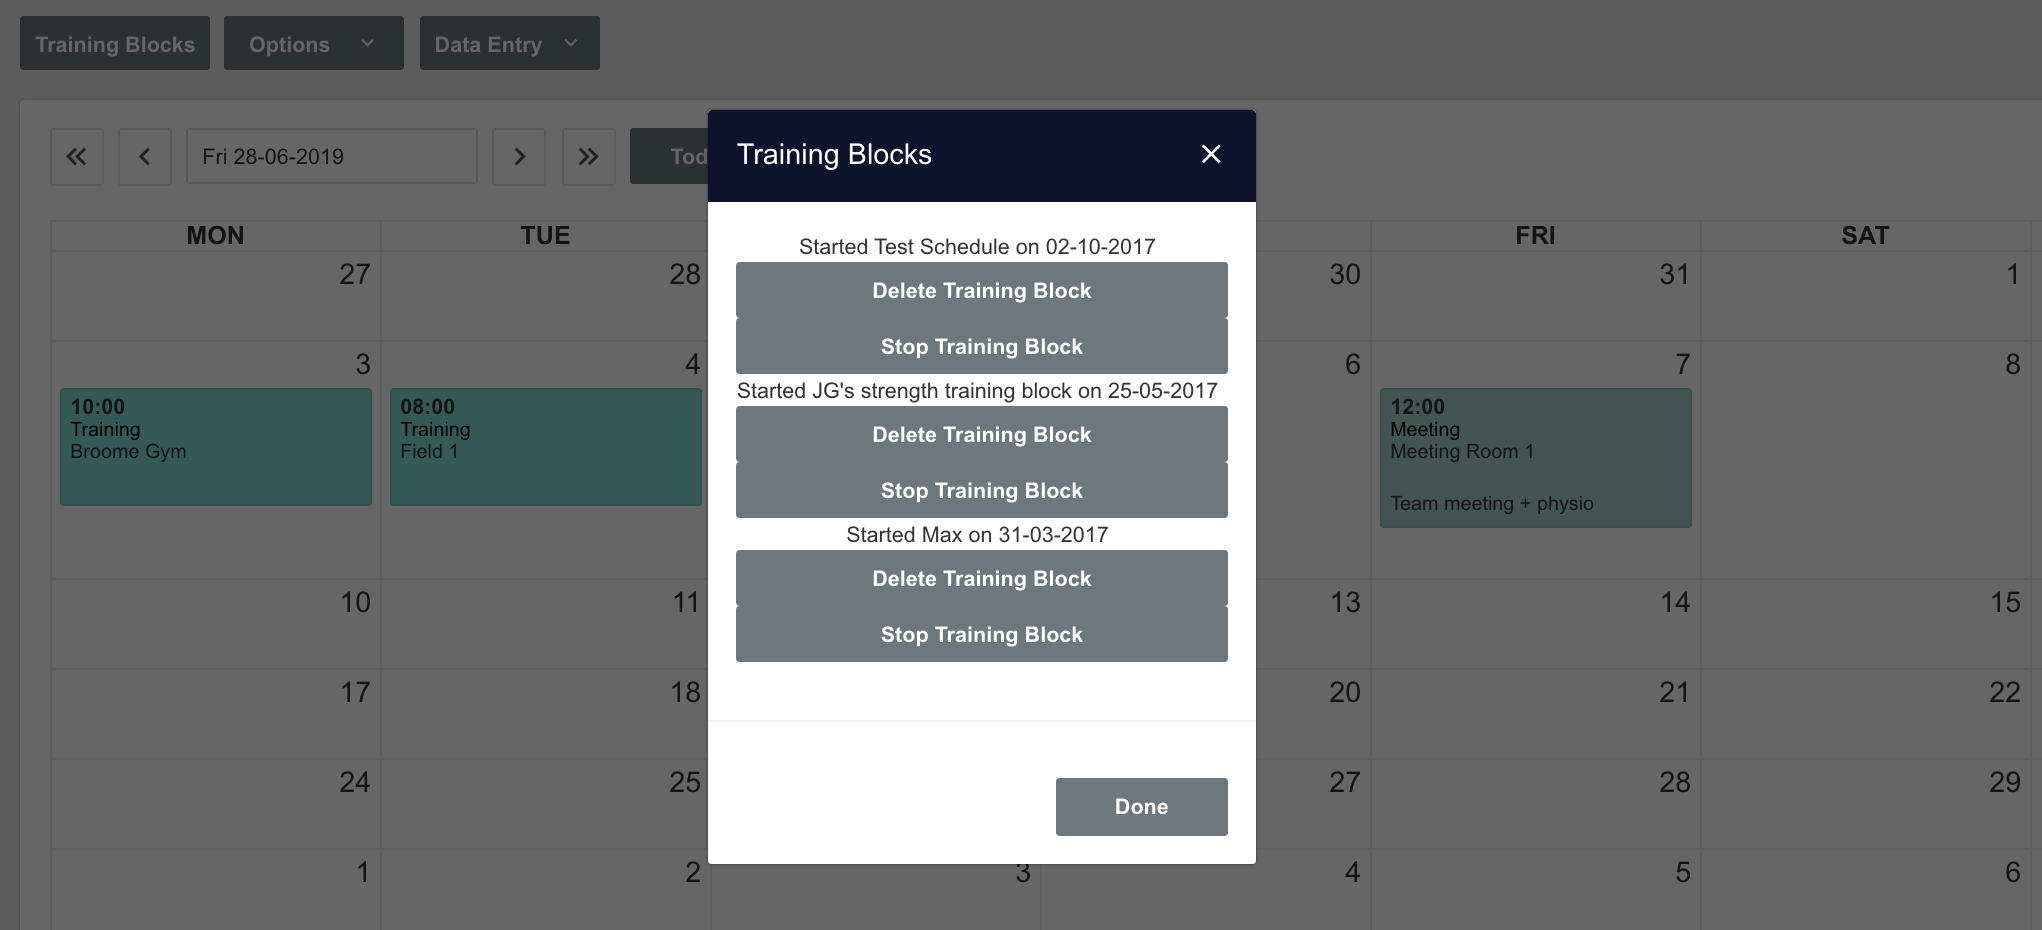 A screenshot showing an example of all training blocks that are active for a particular athlete when viewing the athlete's calendar